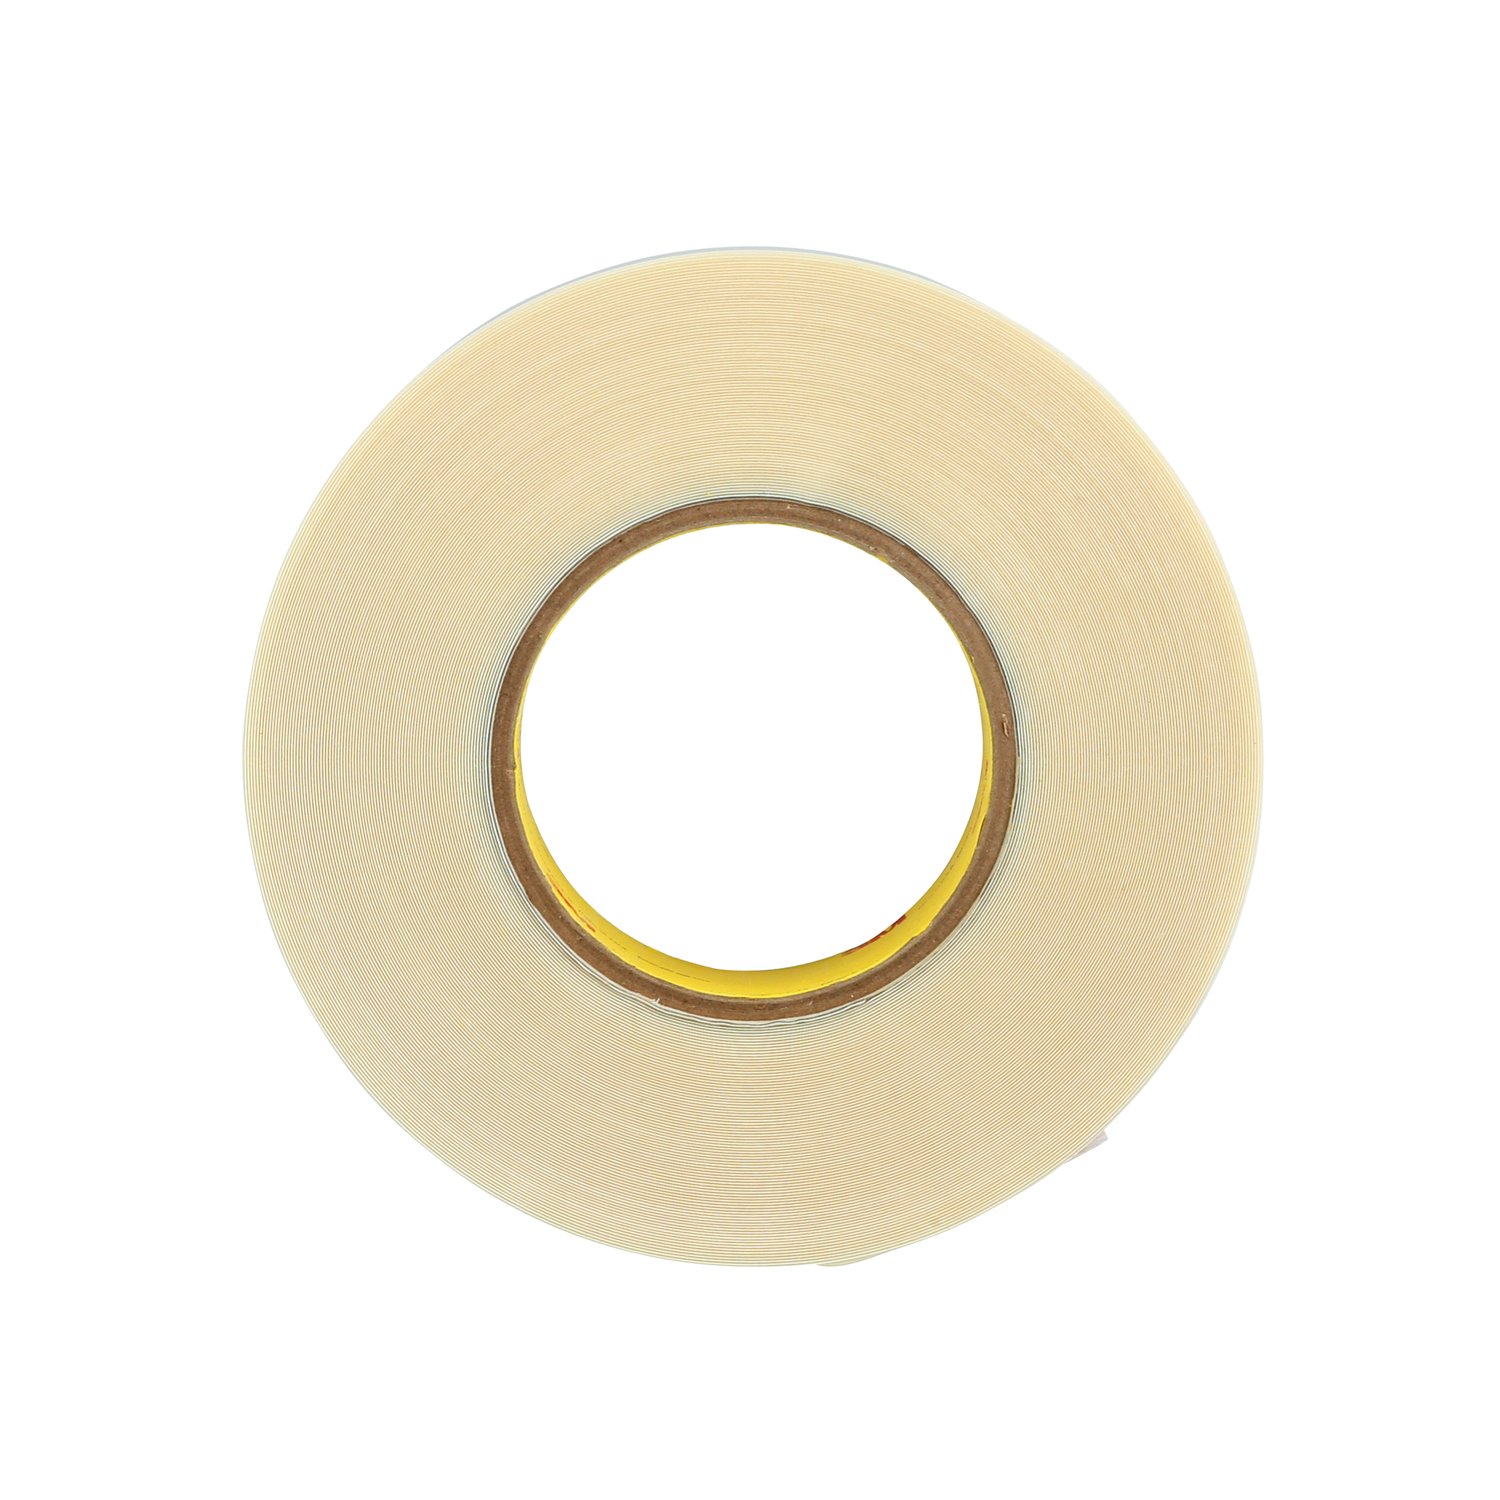 Genuine Double Face Sided Tape (Automotive Grade) for Visor 6mm 3